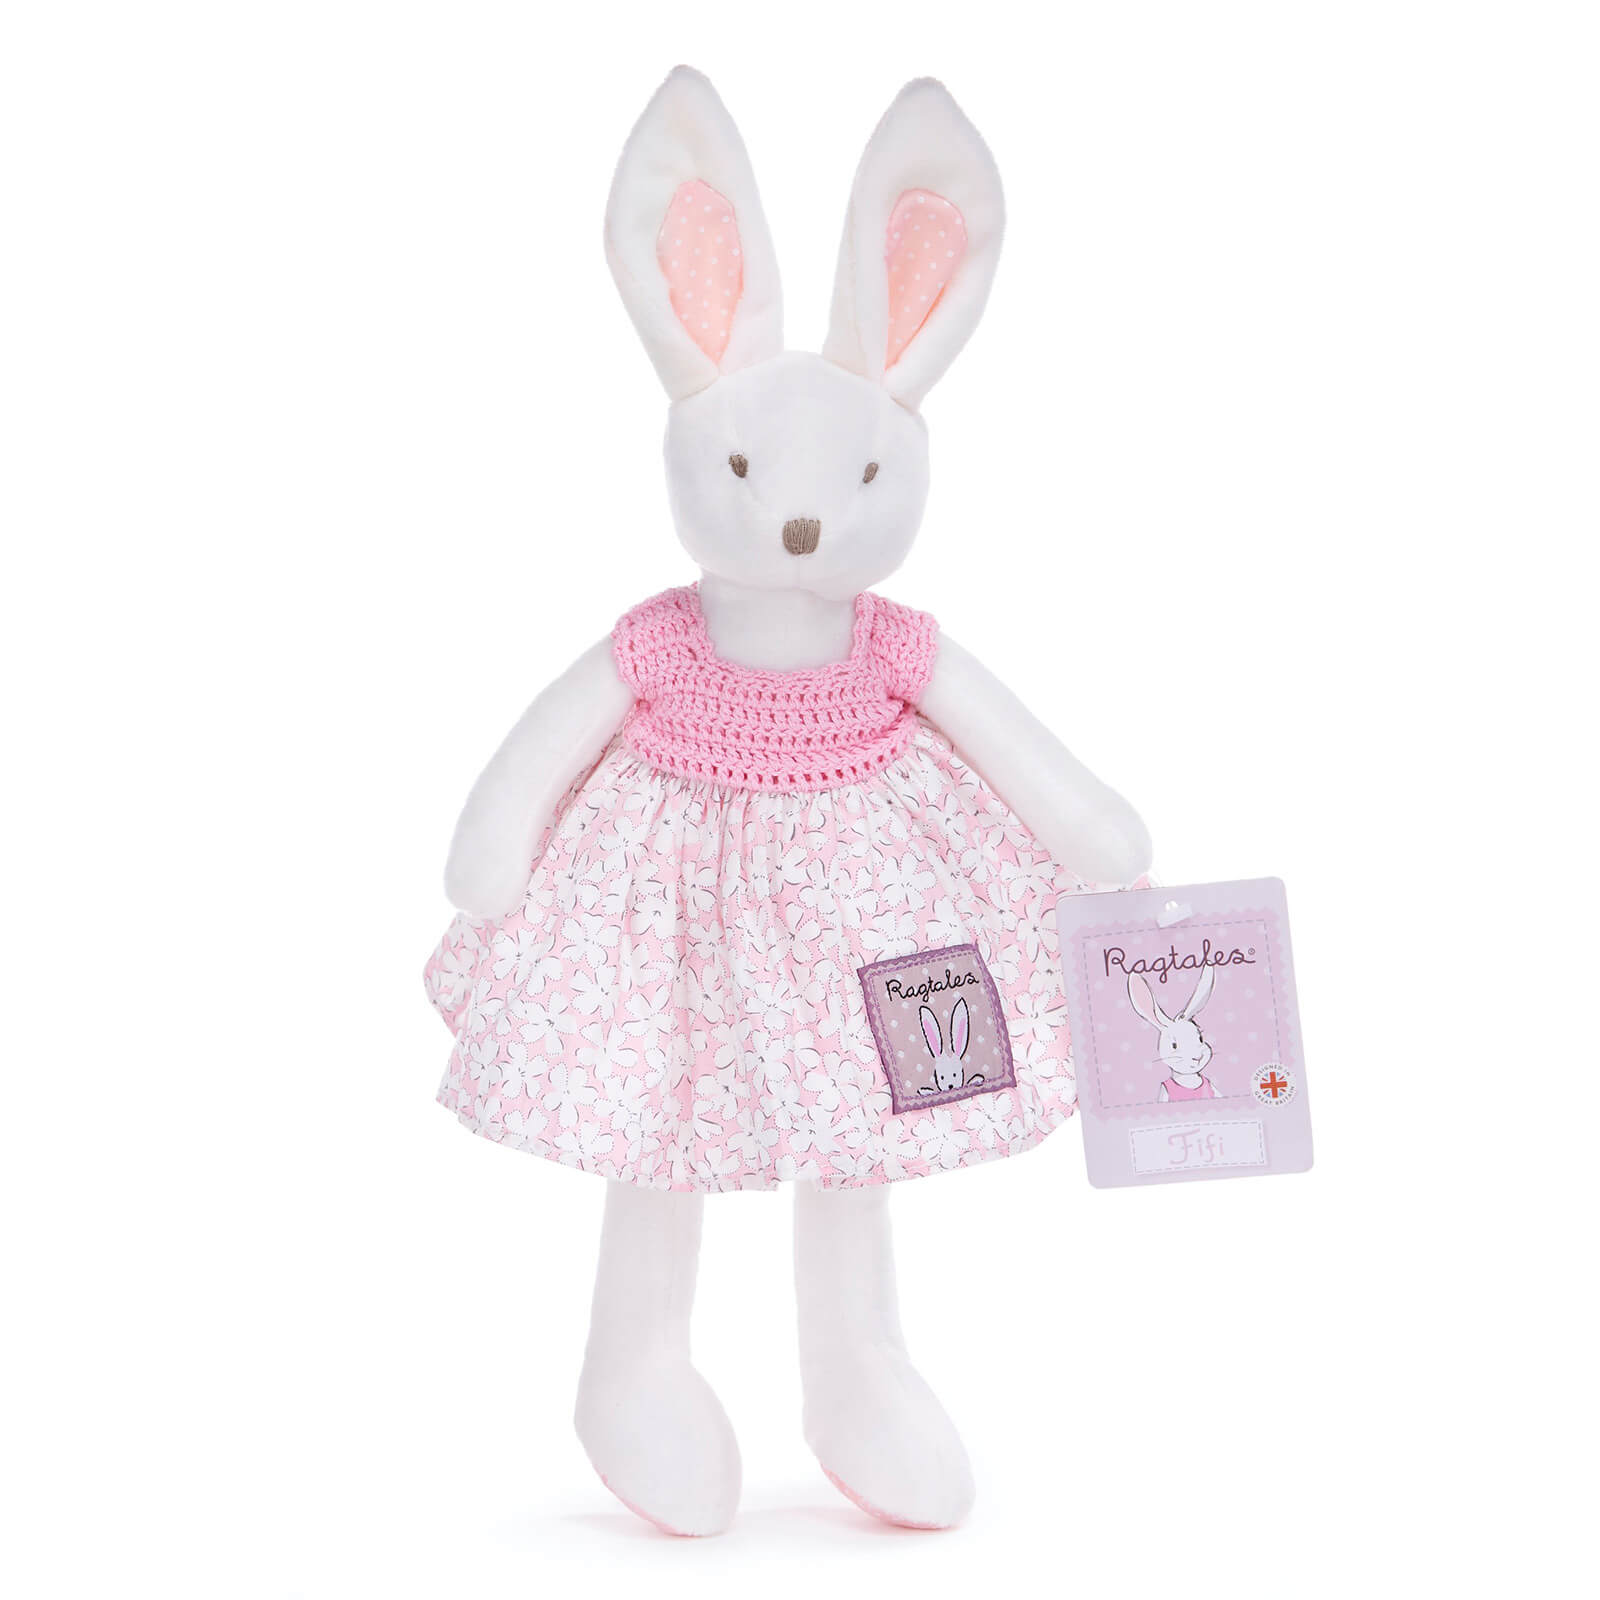 Image of Ragtales by Posh Paws Fifi Rabbit 30cm Soft Toy